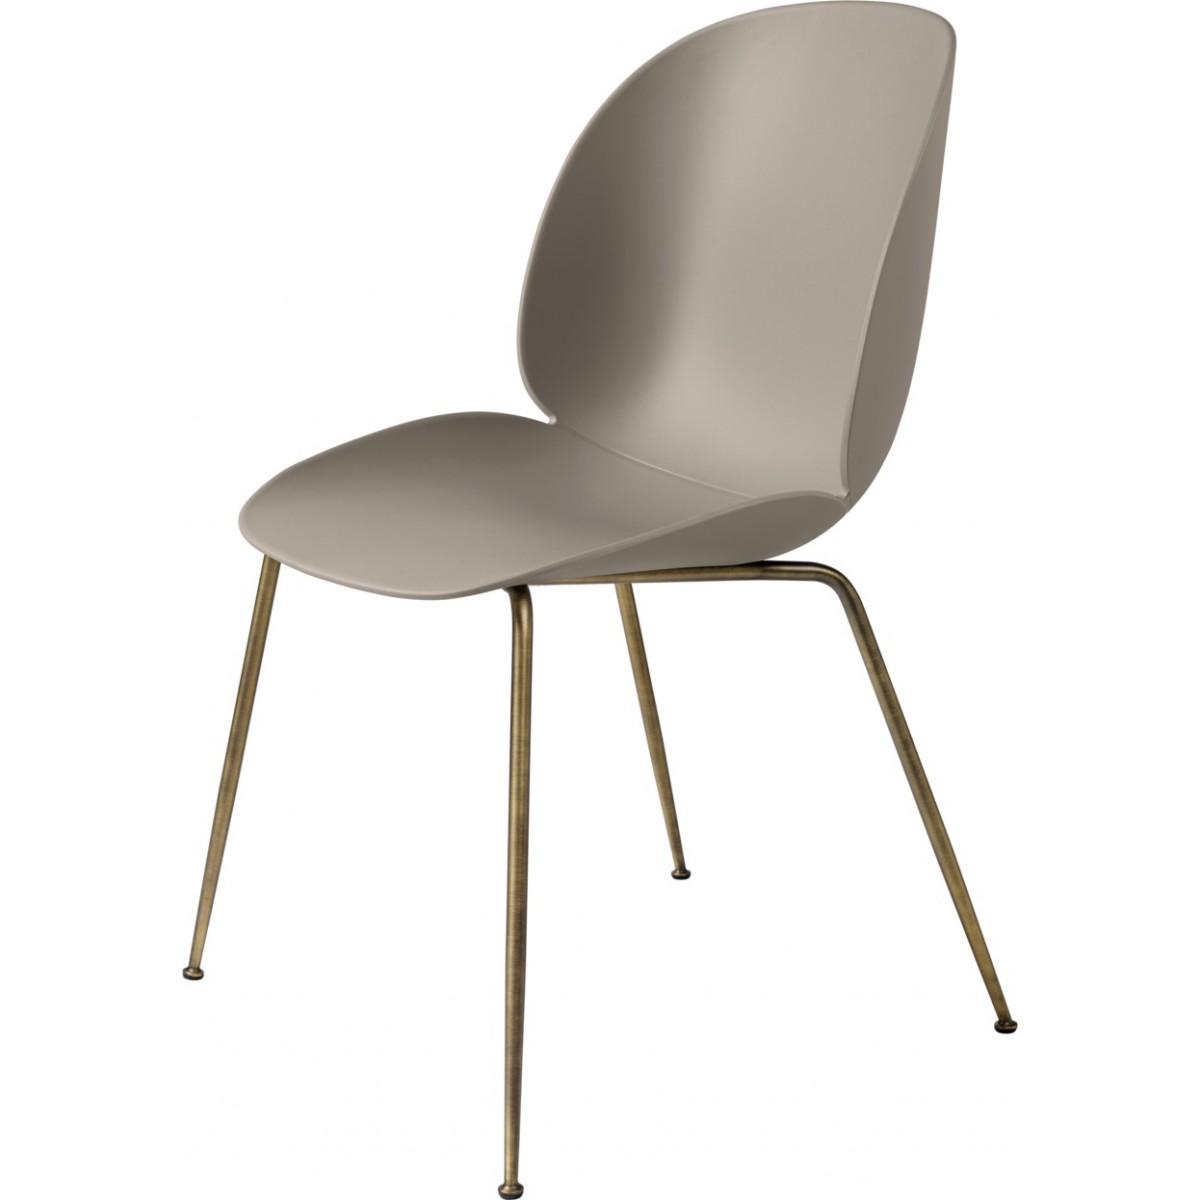 new beige shell - antique brass base - Beetle chair plastic